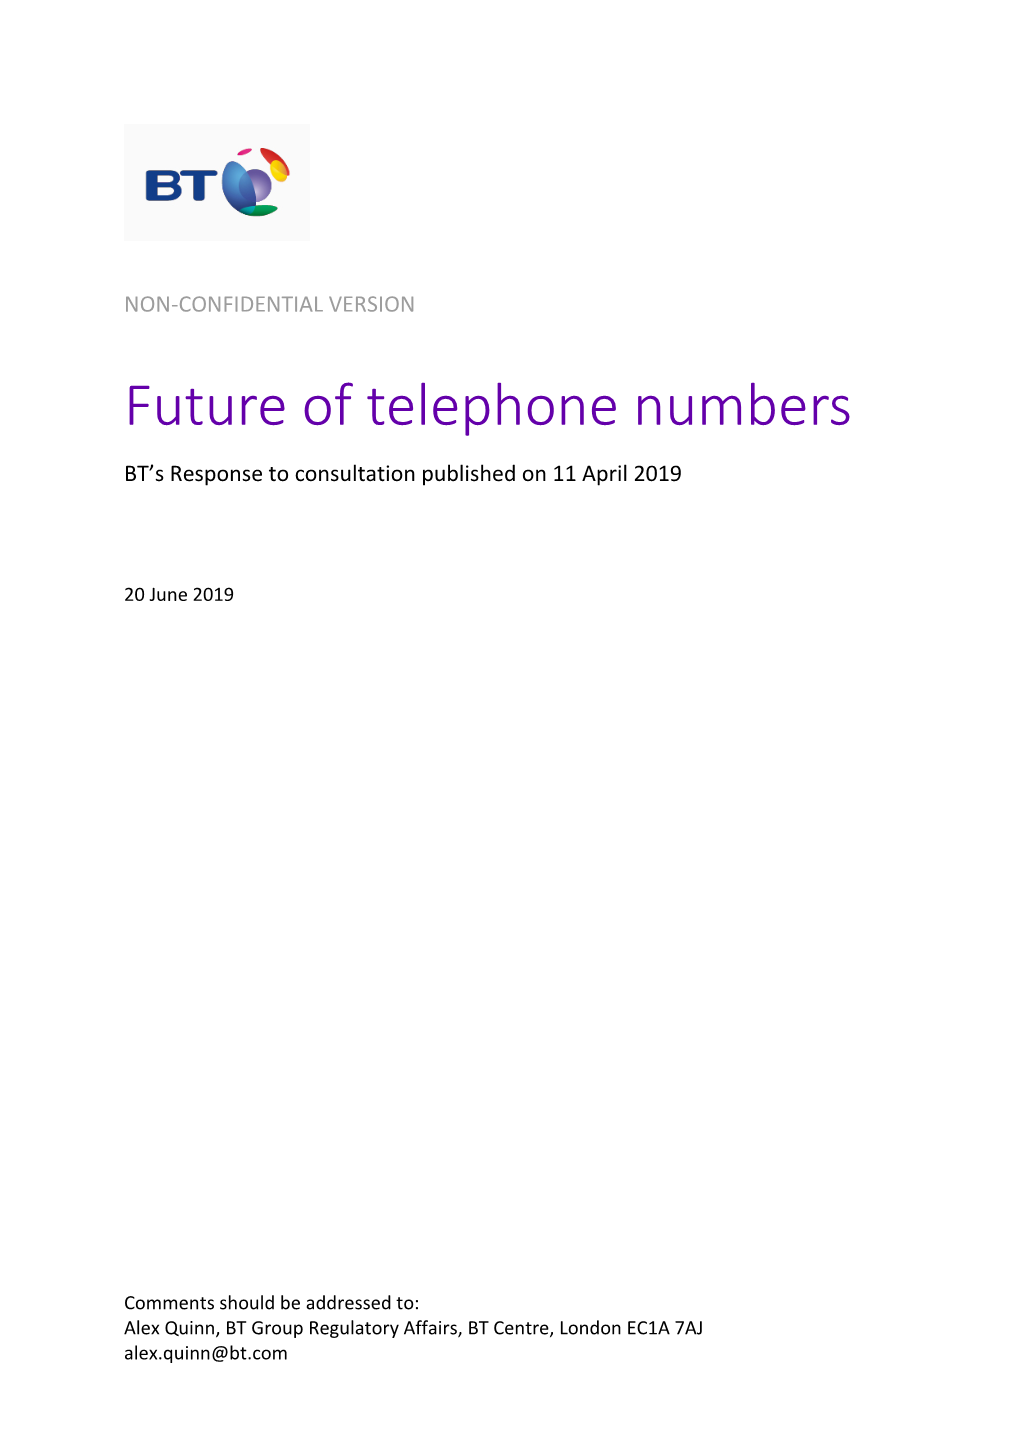 BT's Response to Future of Telephone Numbers